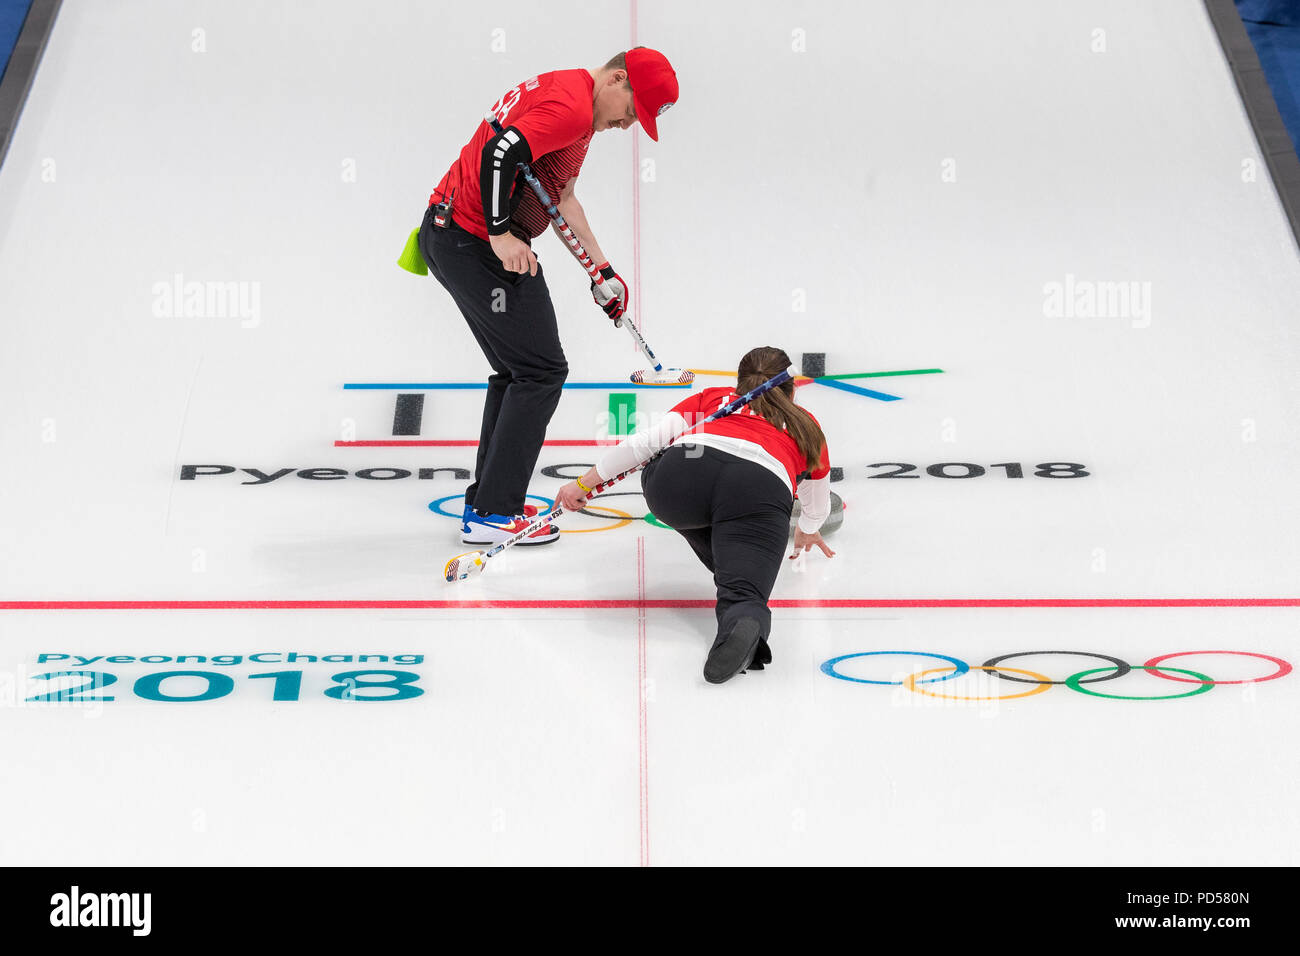 Rebecca and Matt Hamilton (USA) competing in the Mixed Doubles Curling round robin at the Olympic Winter Games PyeongChang 2018 Stock Photo